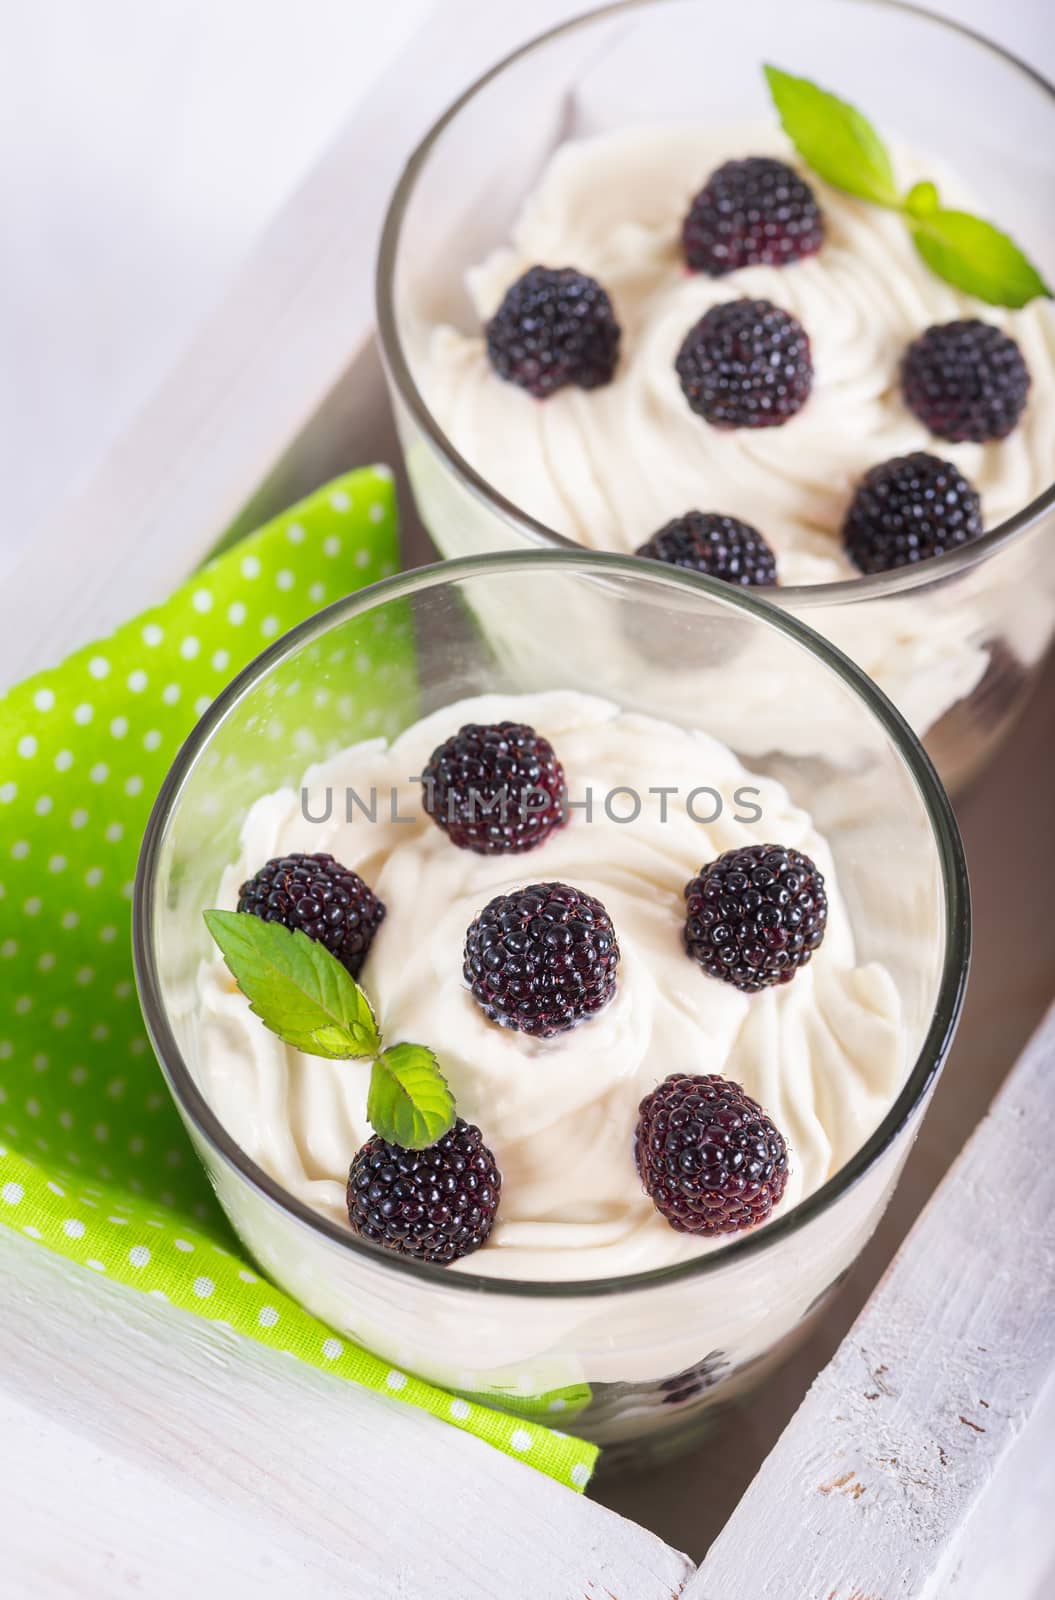 delicious soft cheese dessert with whipped cream and fresh blackberries with a sprig of fresh mint in a glass, green napkin in a decorative wooden box on a white table